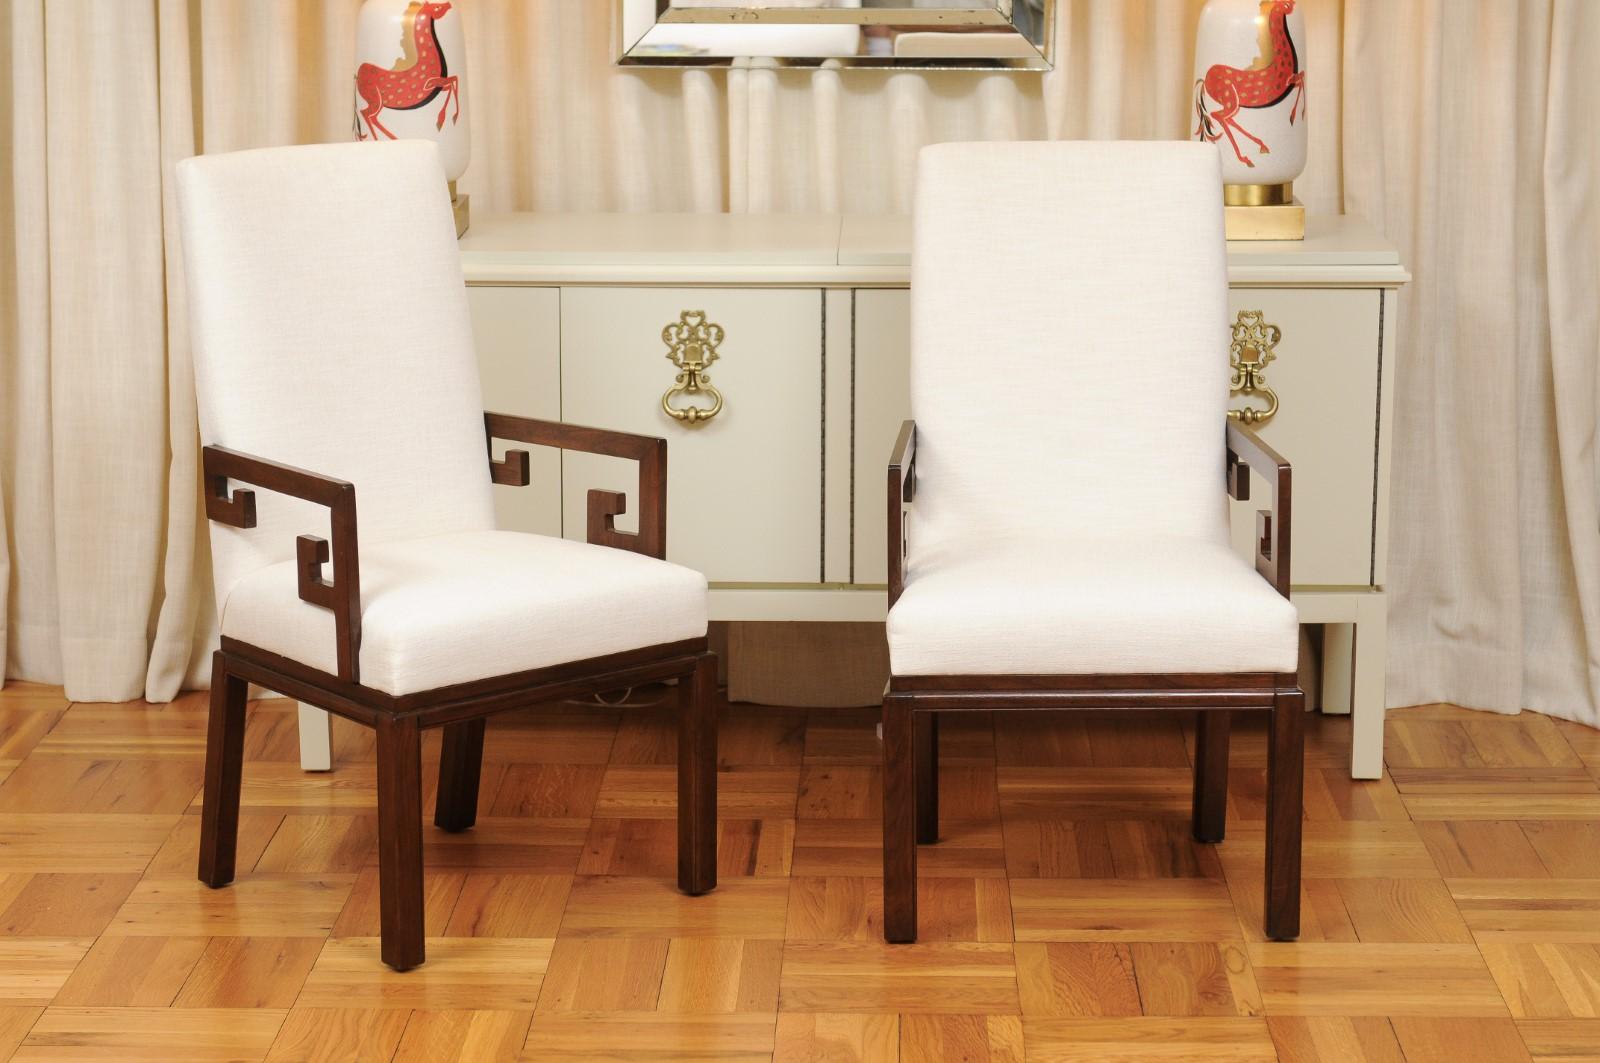 These magnificent dining chairs are shipped as professionally photographed and described in the listing narrative: completely installation ready. This large all arm set is unique on the World market. Expert custom upholstery service is